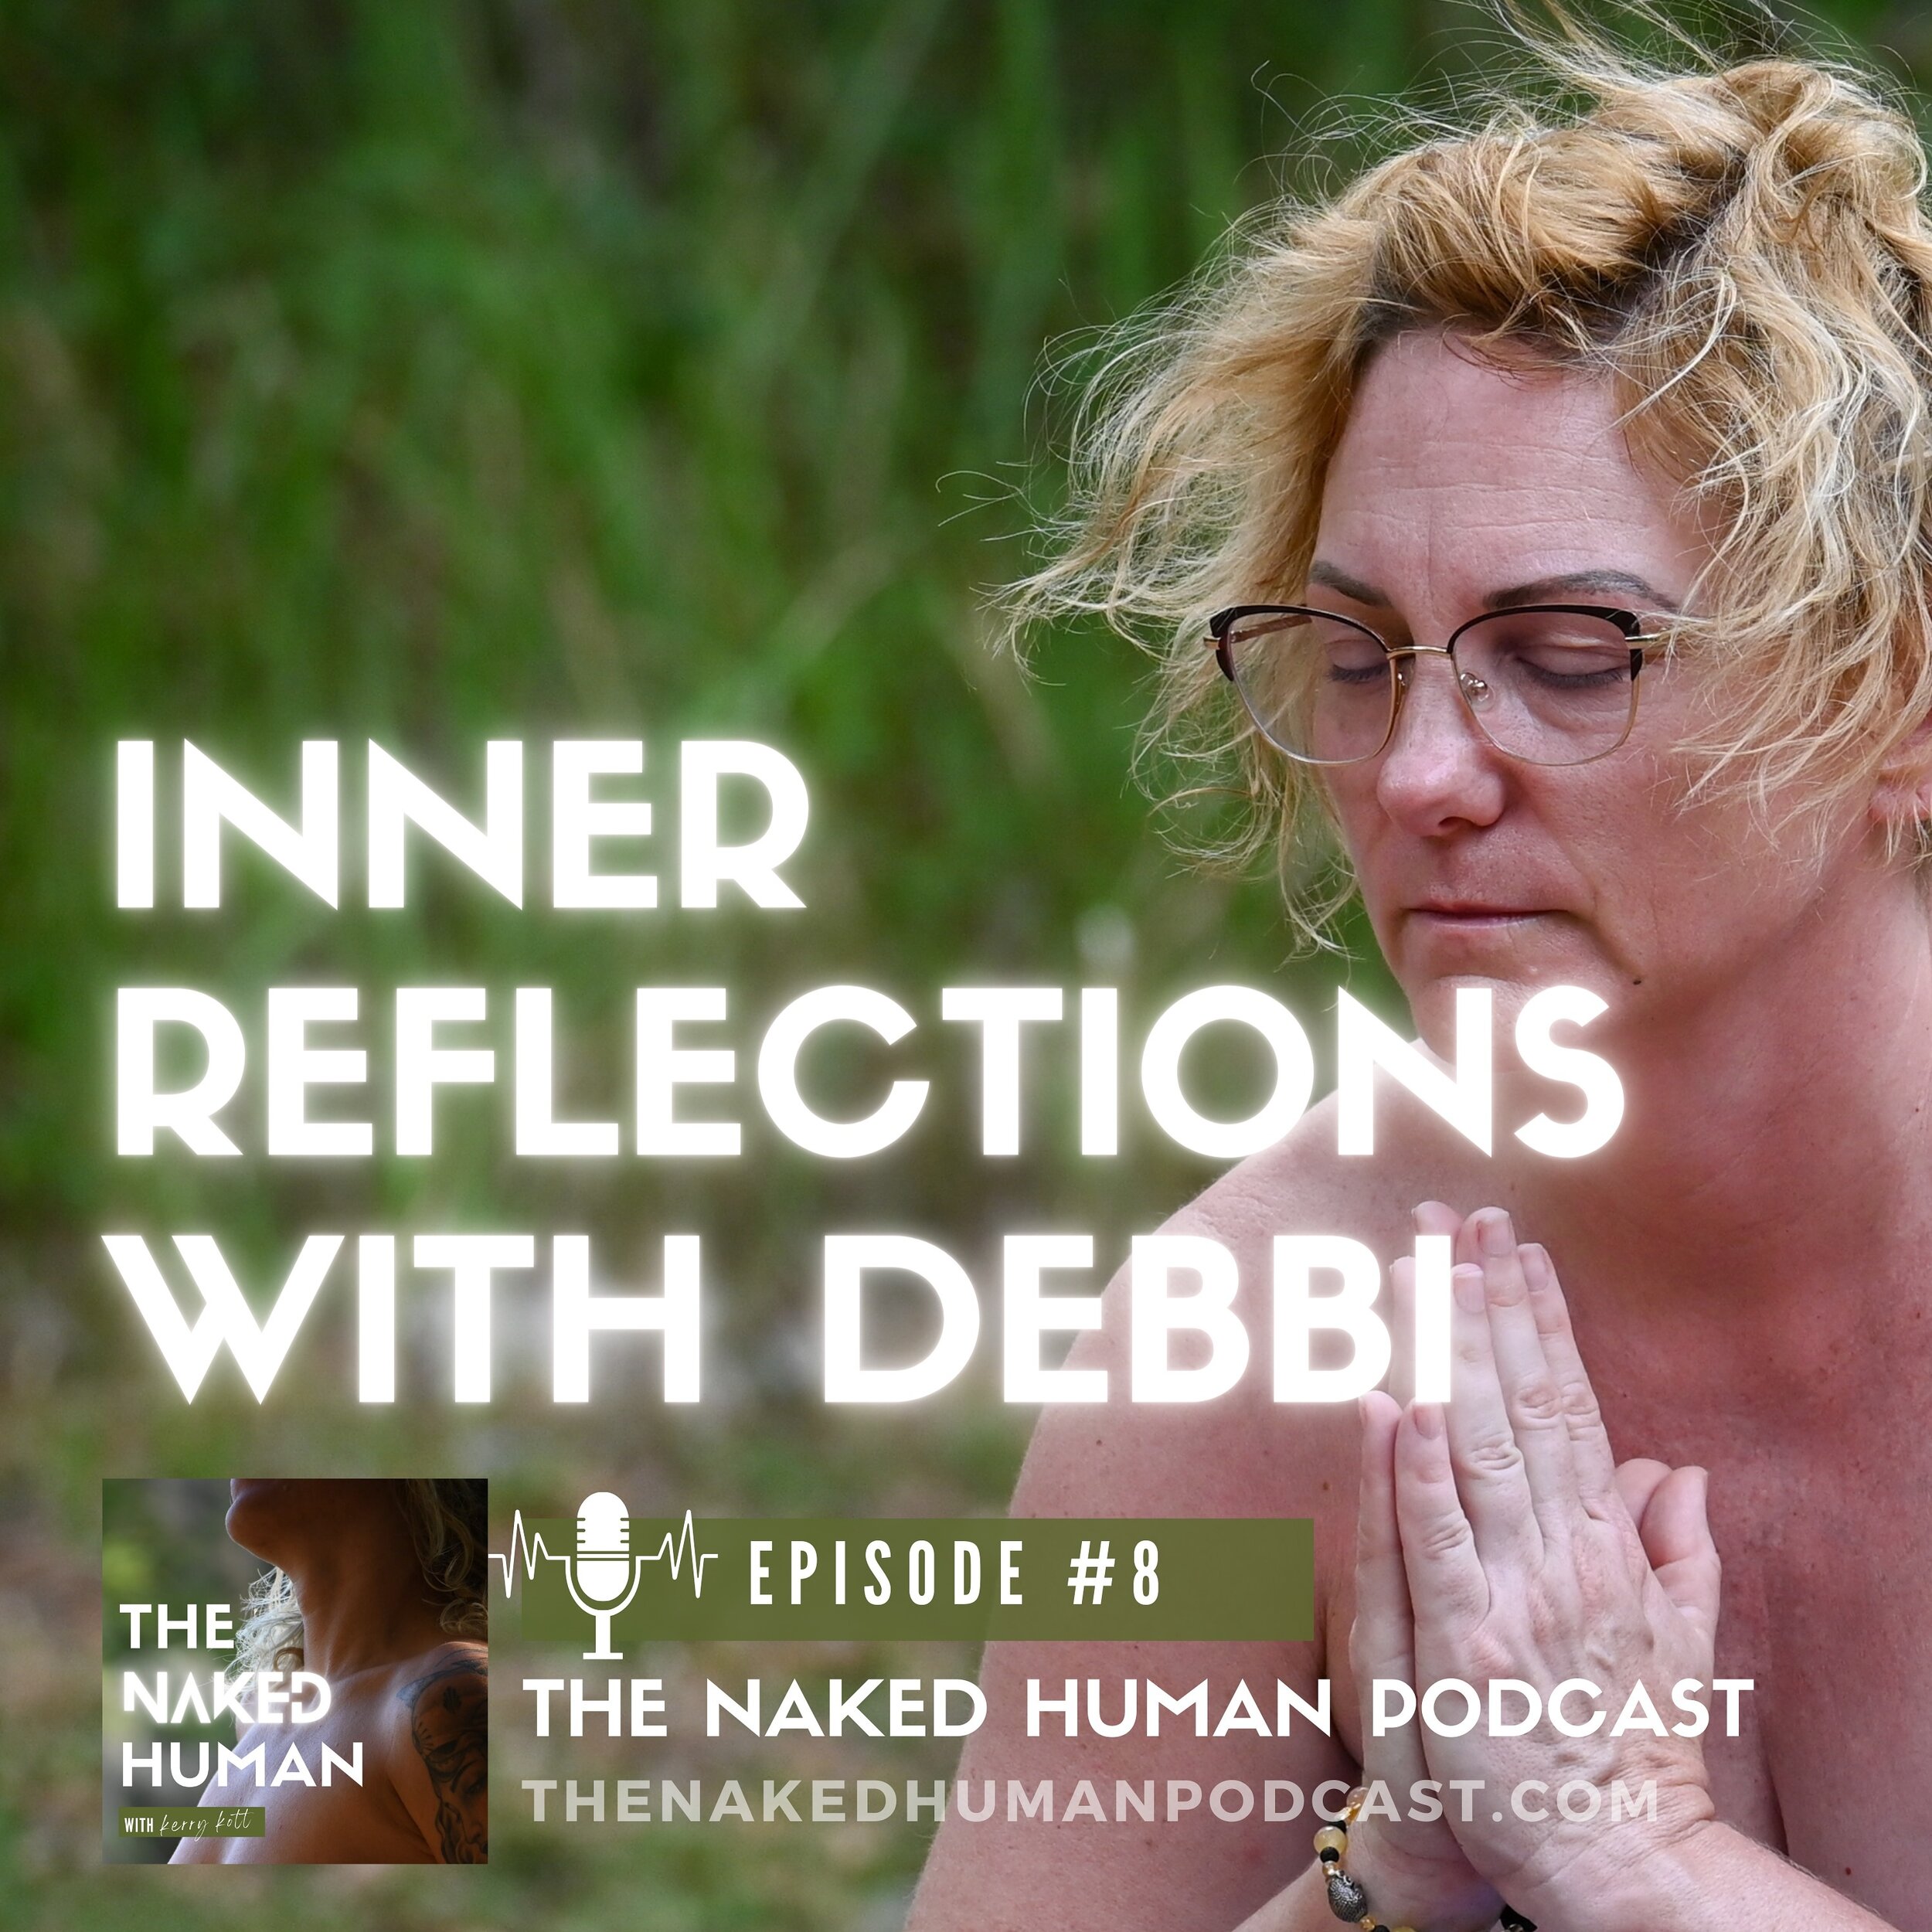 Dive into the insightful stories, personal growth, and unique perspectives of retreat participants. In this episode we dive in with Debbi as she shares her deep exploration of self-discovery and the powerful impact of her retreat participation.

Show